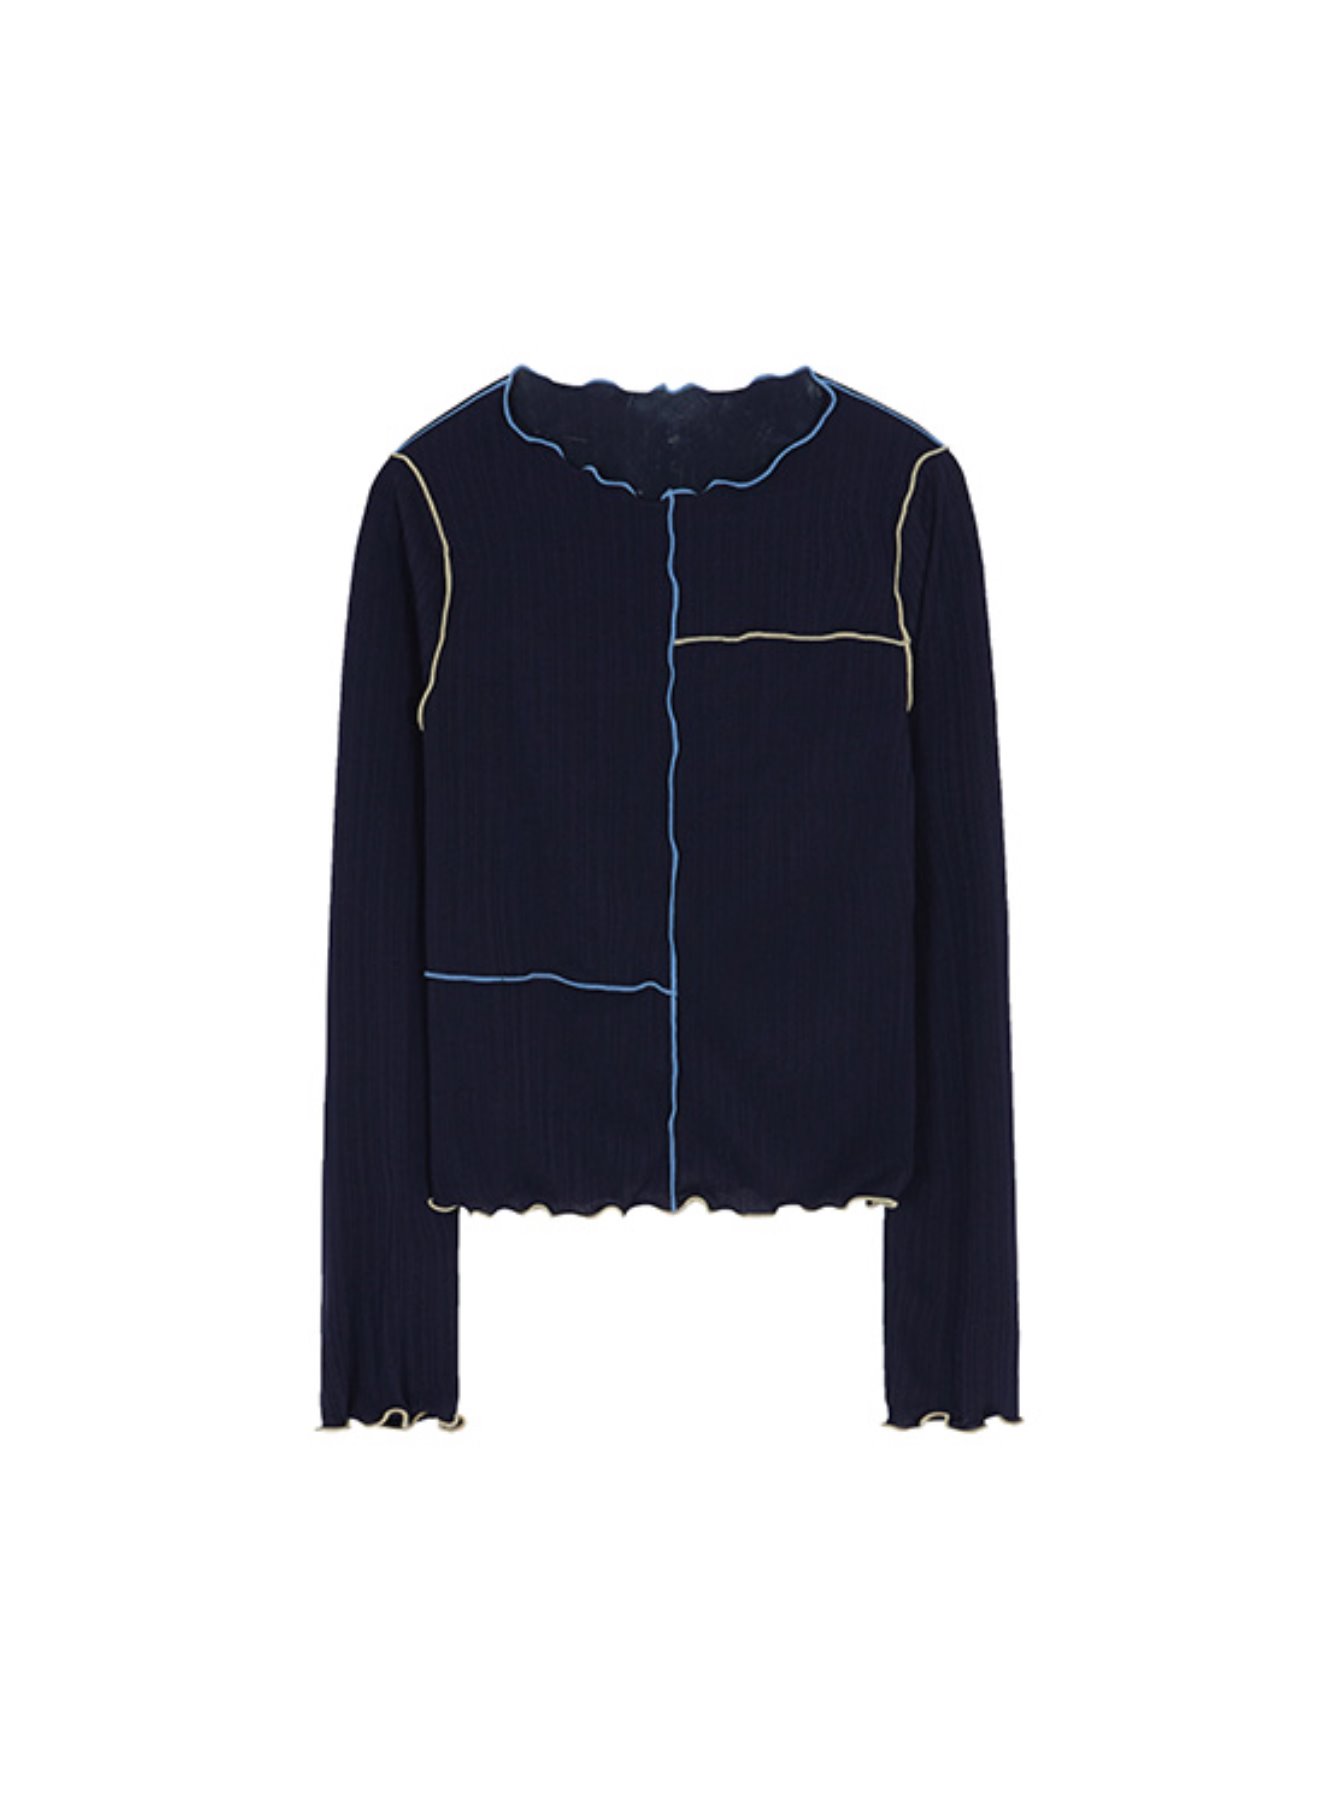 Line Pleated Jersey Top in Navy VW2SE113-23